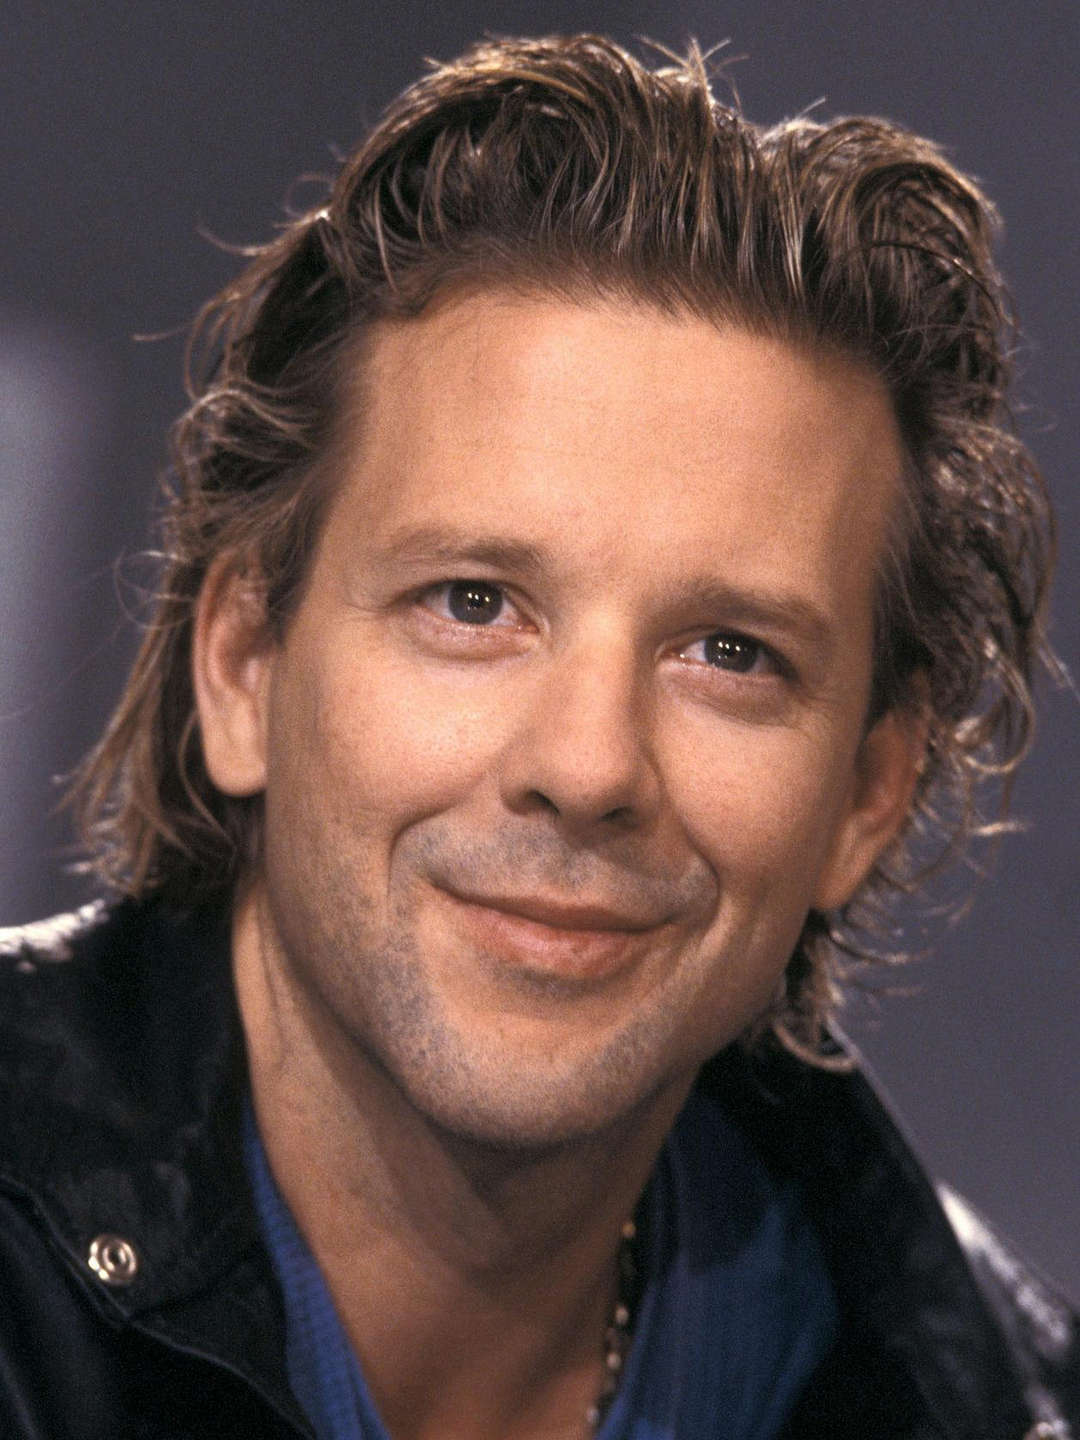 Mickey Rourke who is his mother